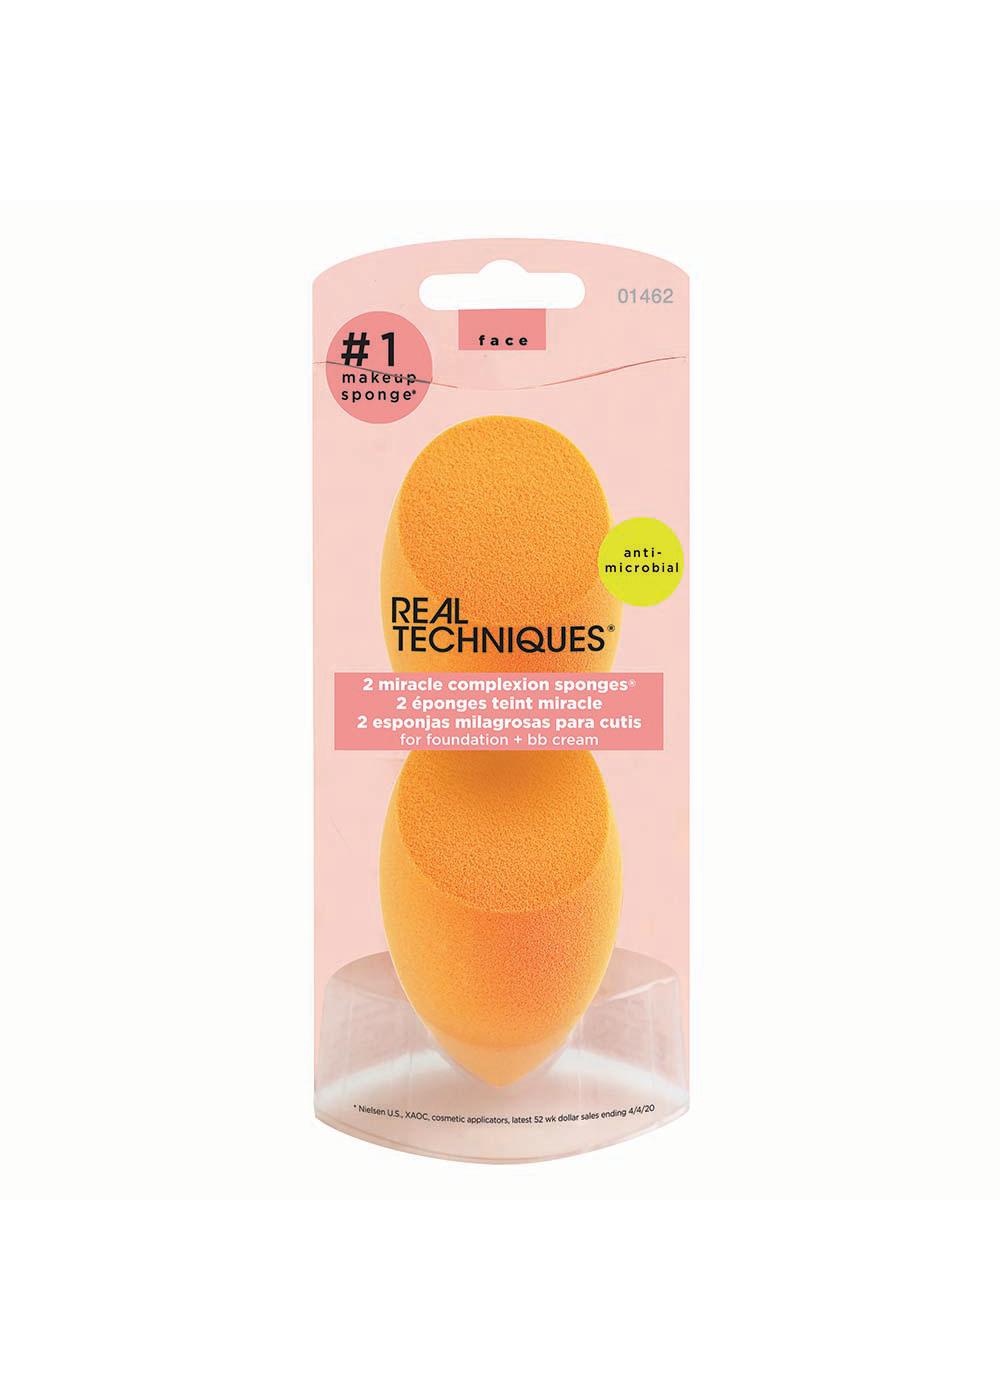 This or That  Beauty blender Vs. Real Techniques Miracle